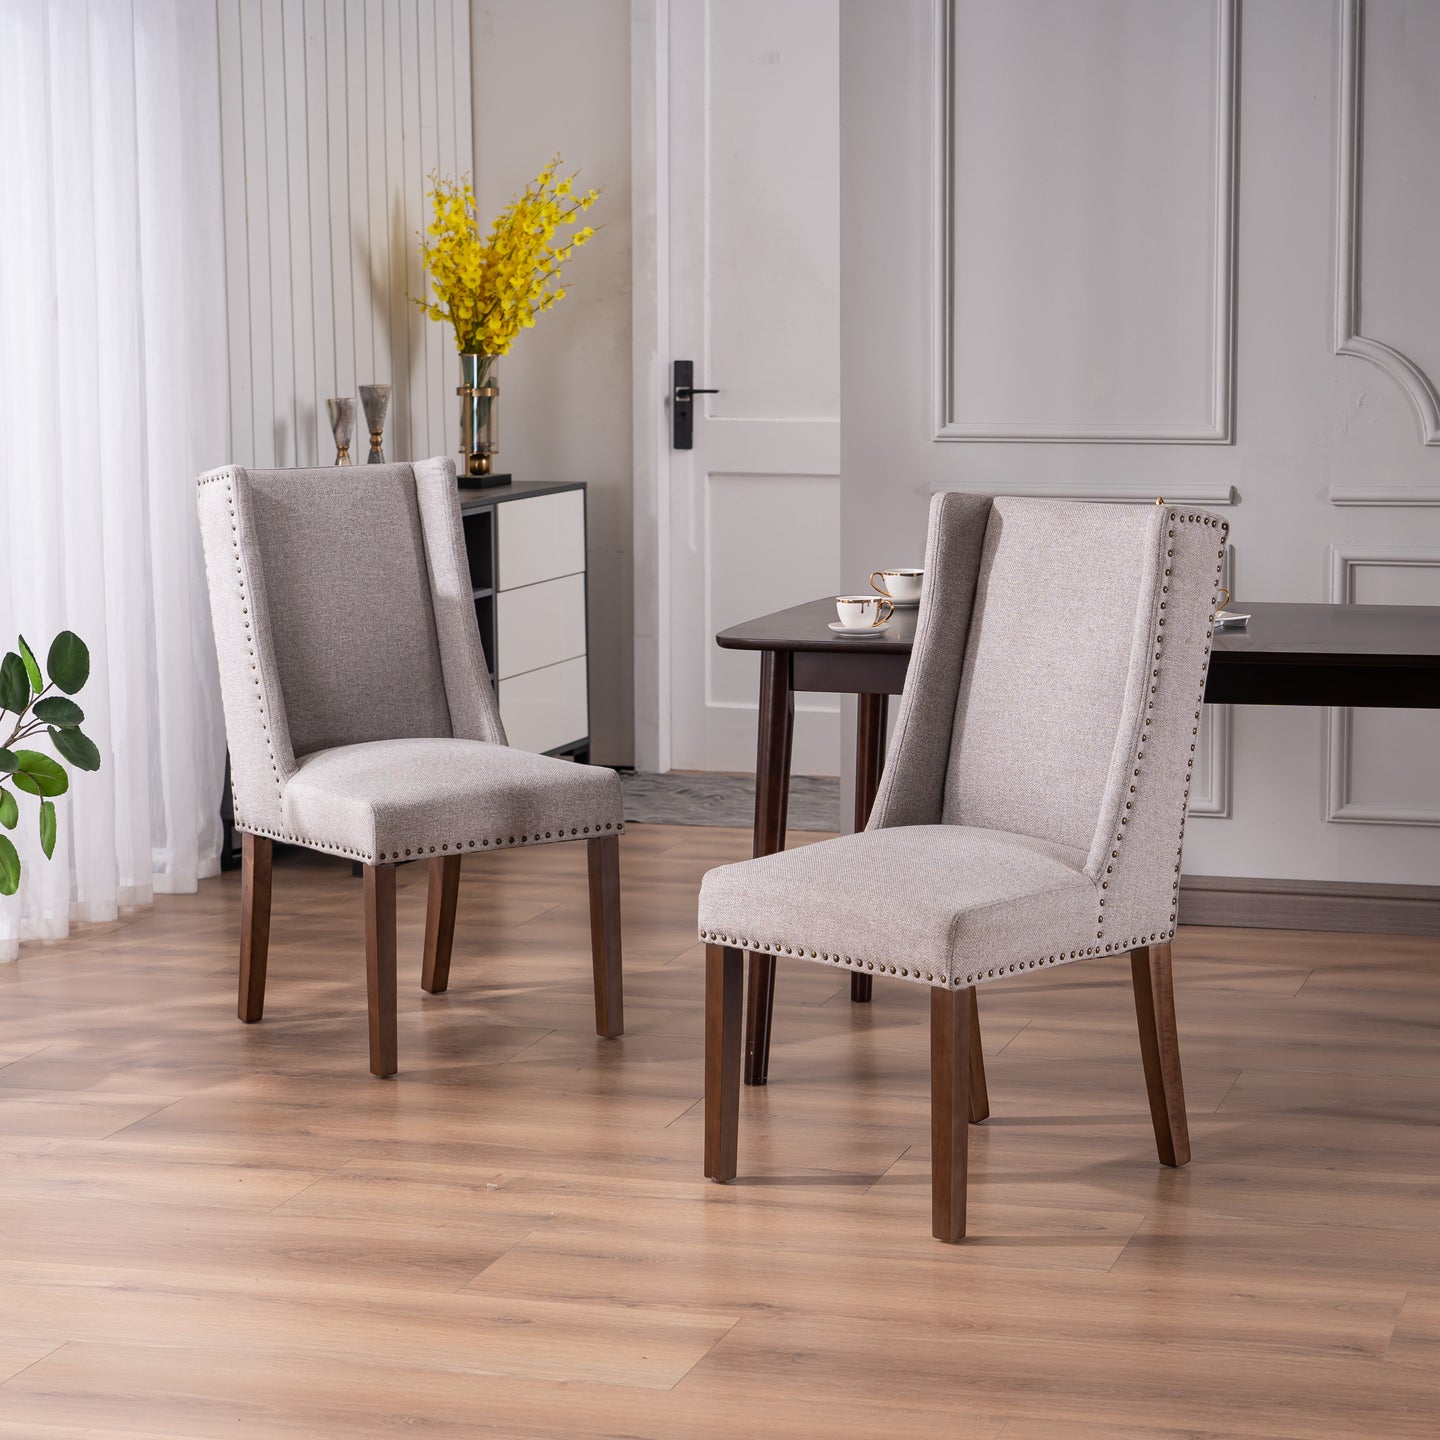 Wing dining chair